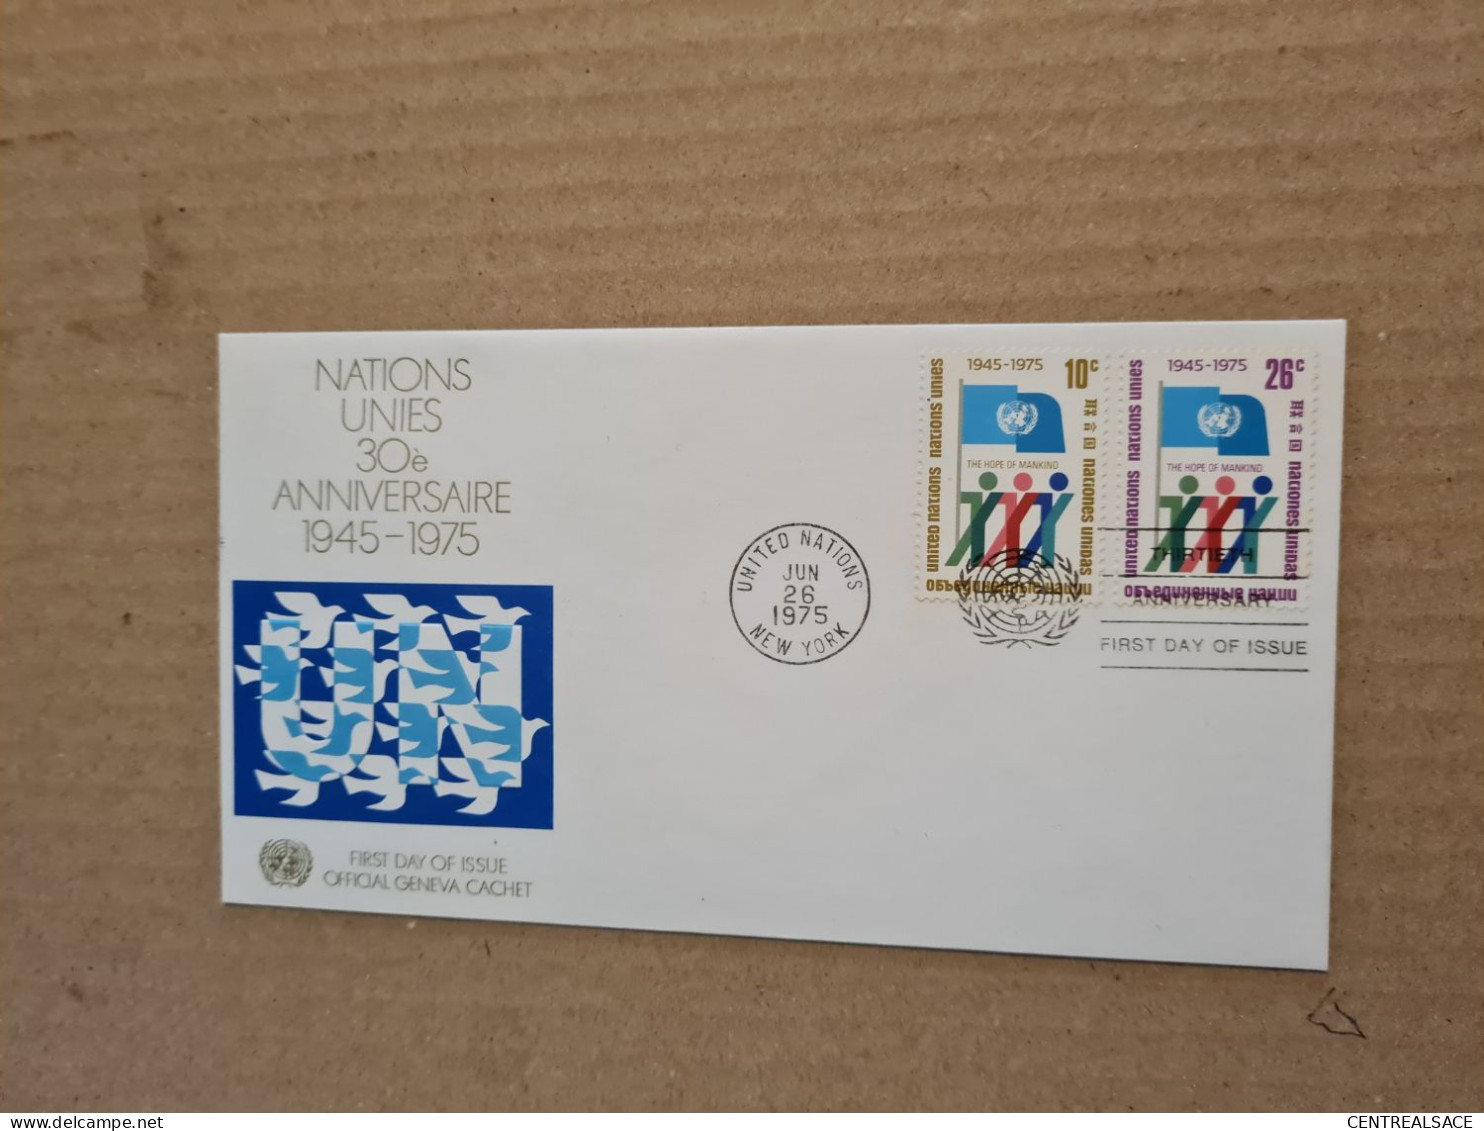 FDC NEW YORK UNITED NATIONS NATIONS UNIES 30e ANNIVERSAIRE 1945/1975 - Covers & Documents